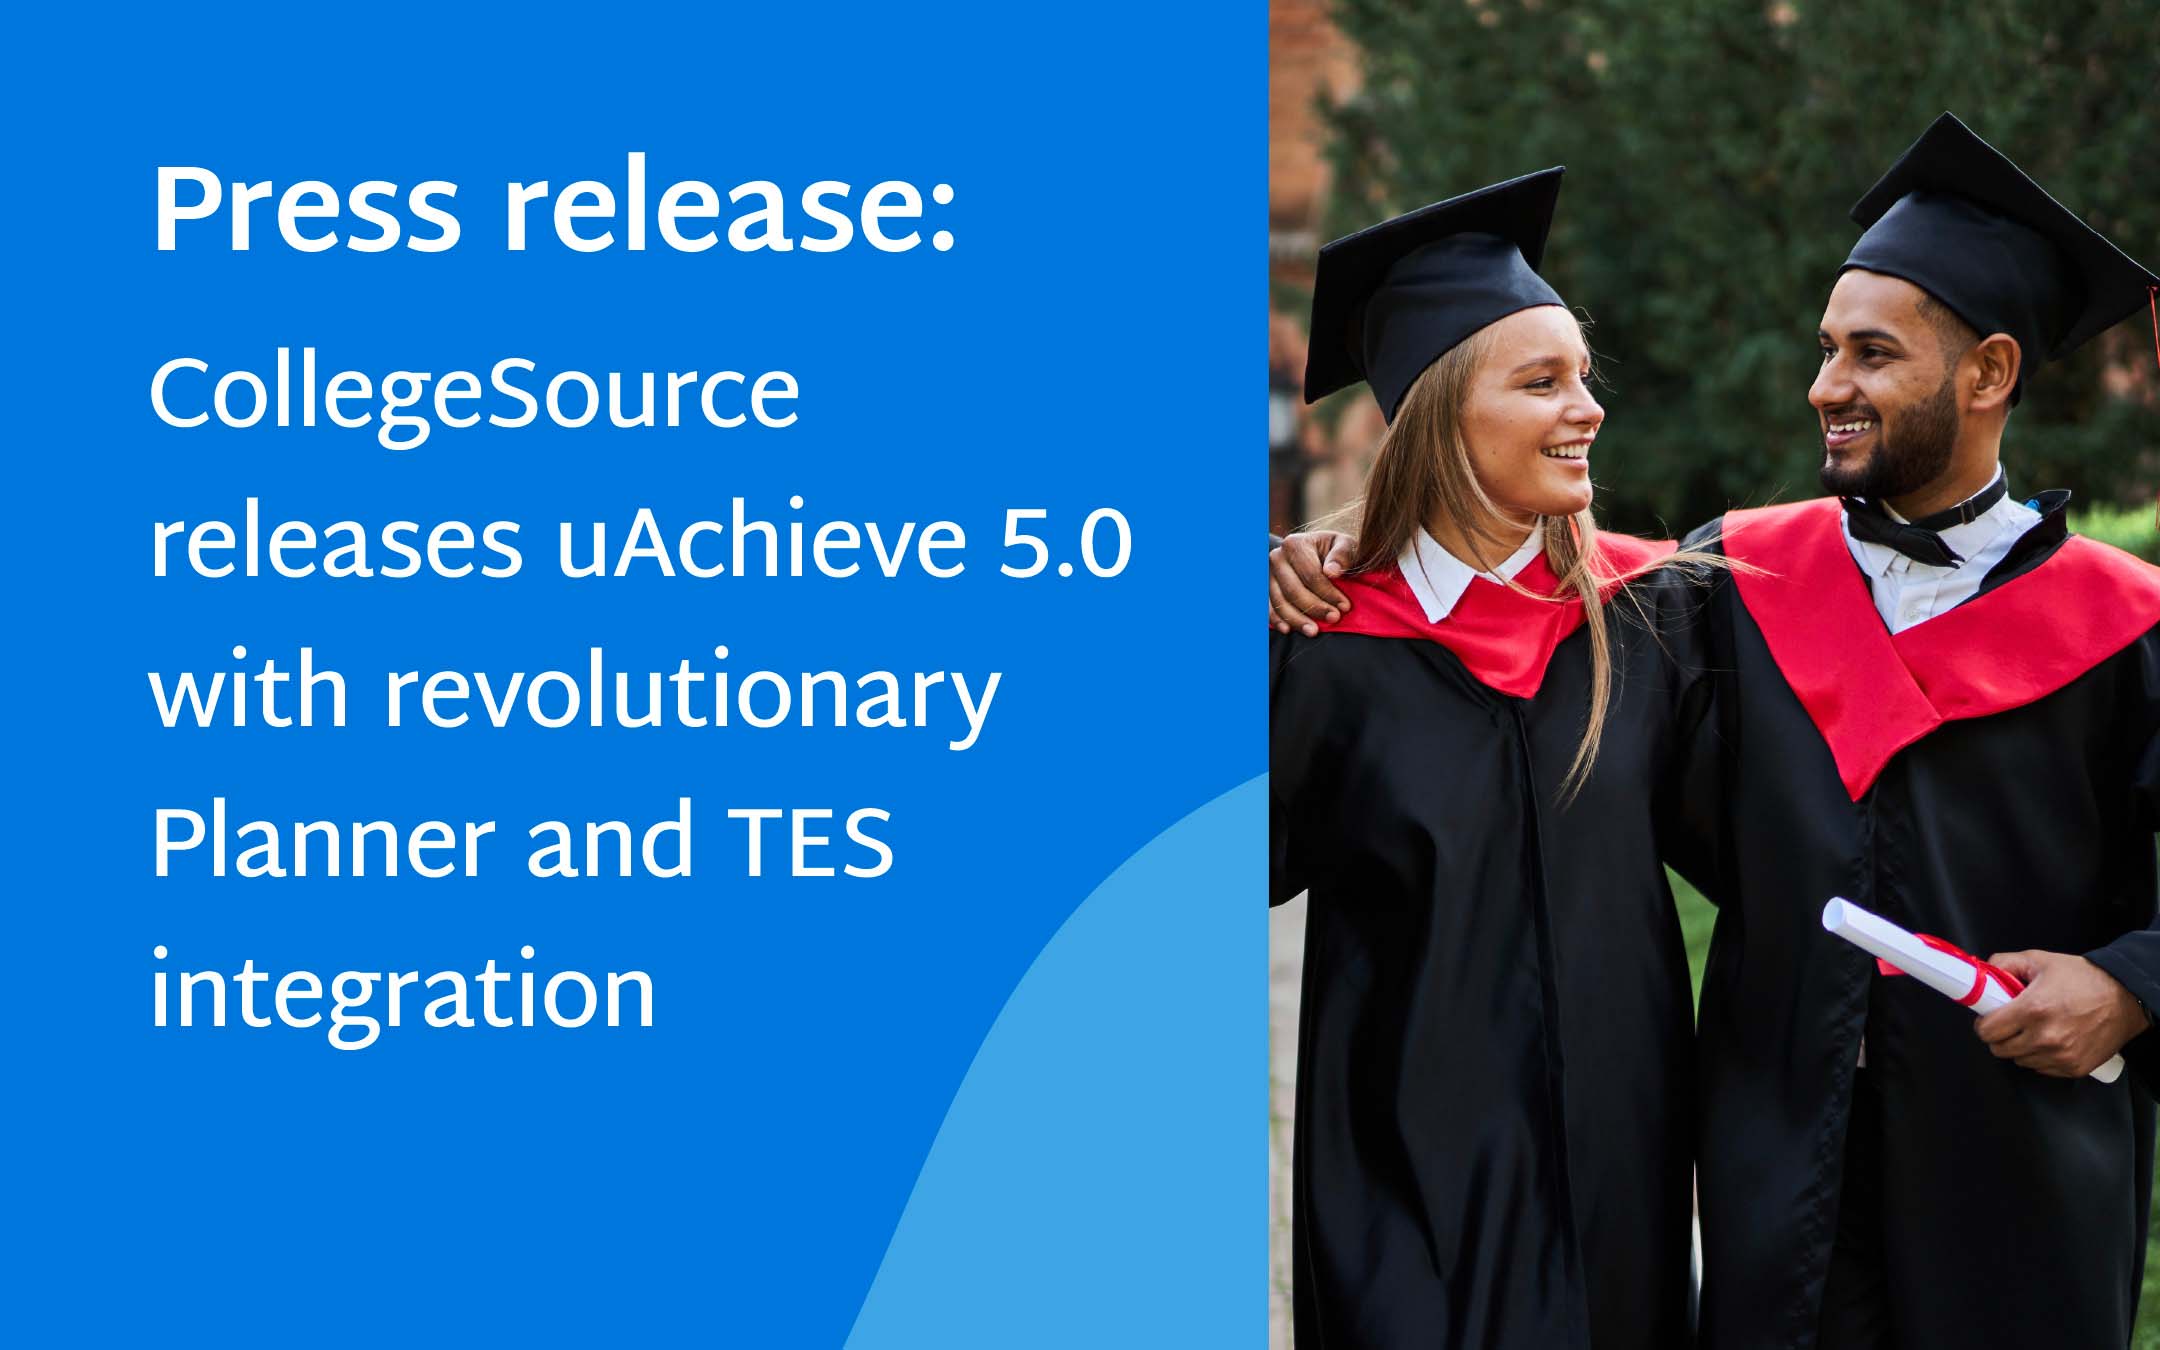 CollegeSource-releases-uAchieve-5.0-Planner-TES-Integration